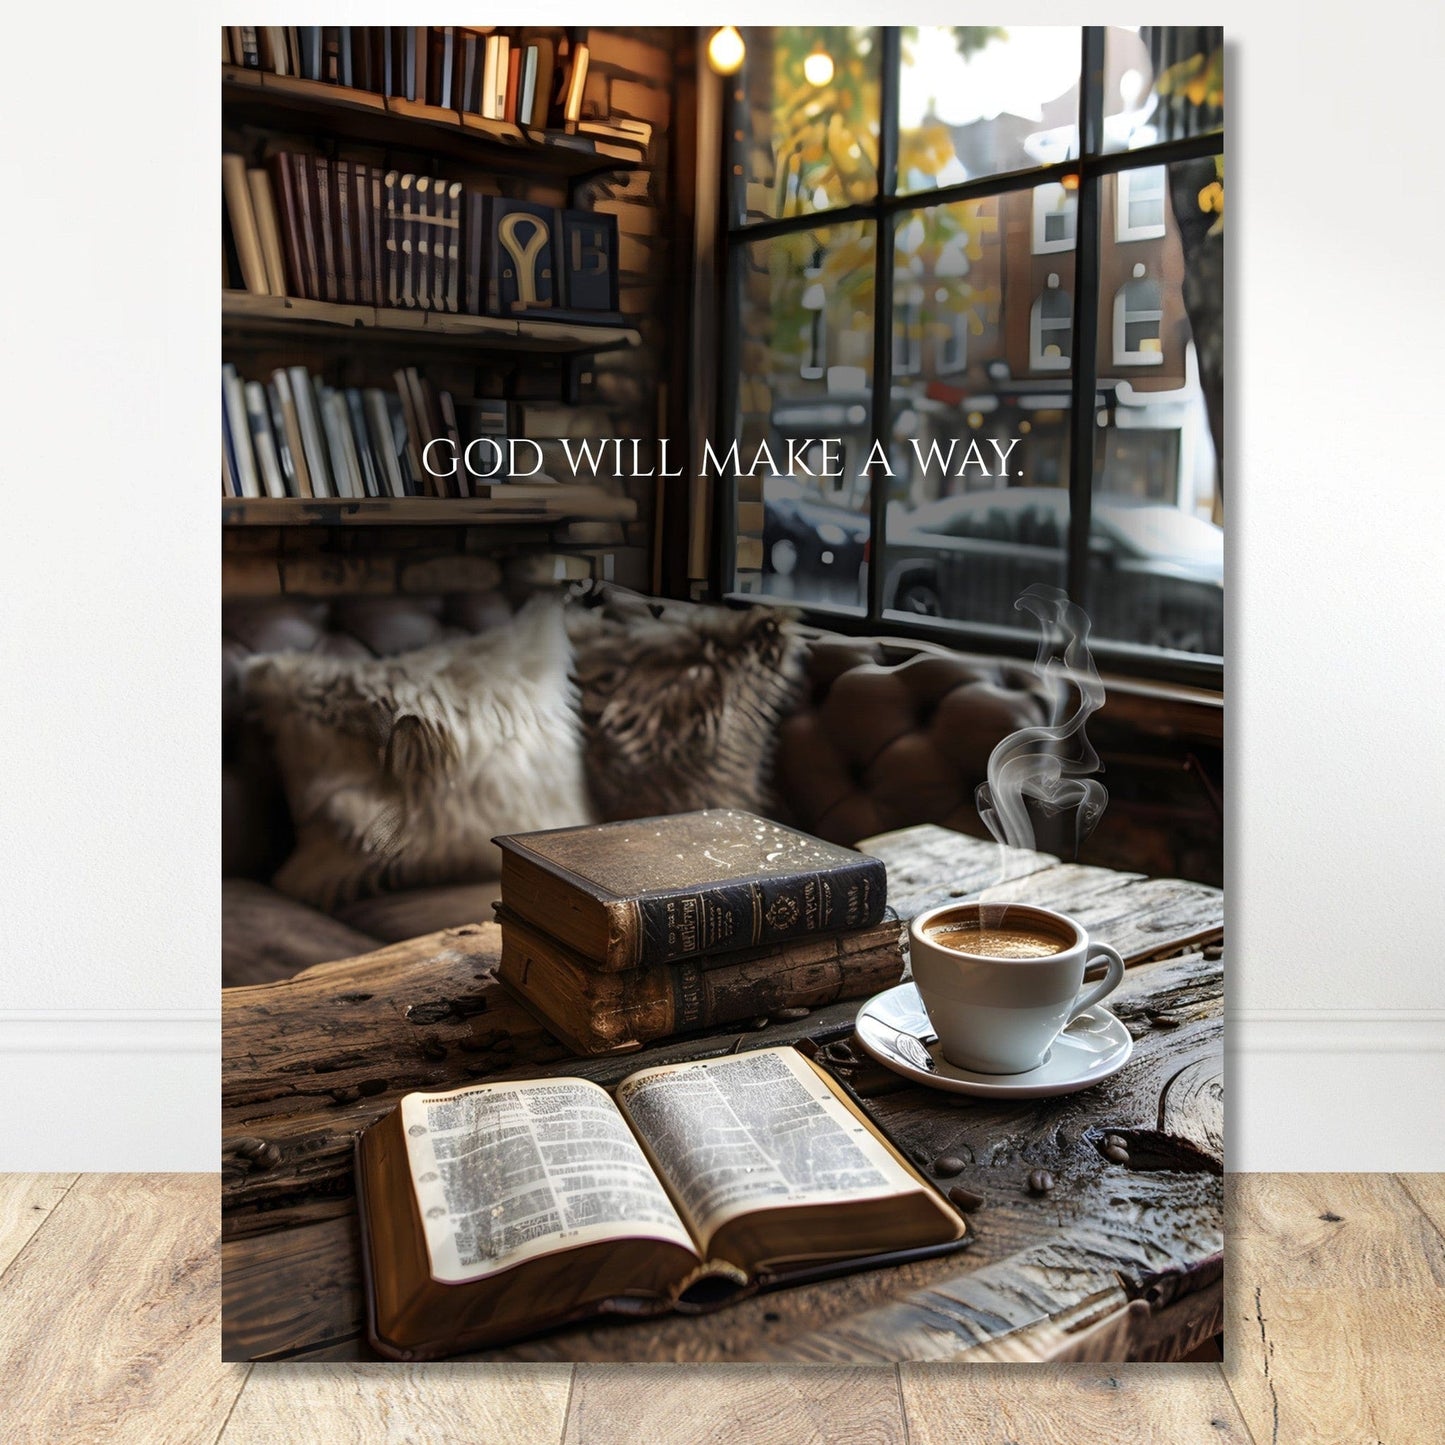 Coffee With My Father Print Material 45x60 cm / 18x24″ / Premium Matte Paper Poster / - God Will Make A Way